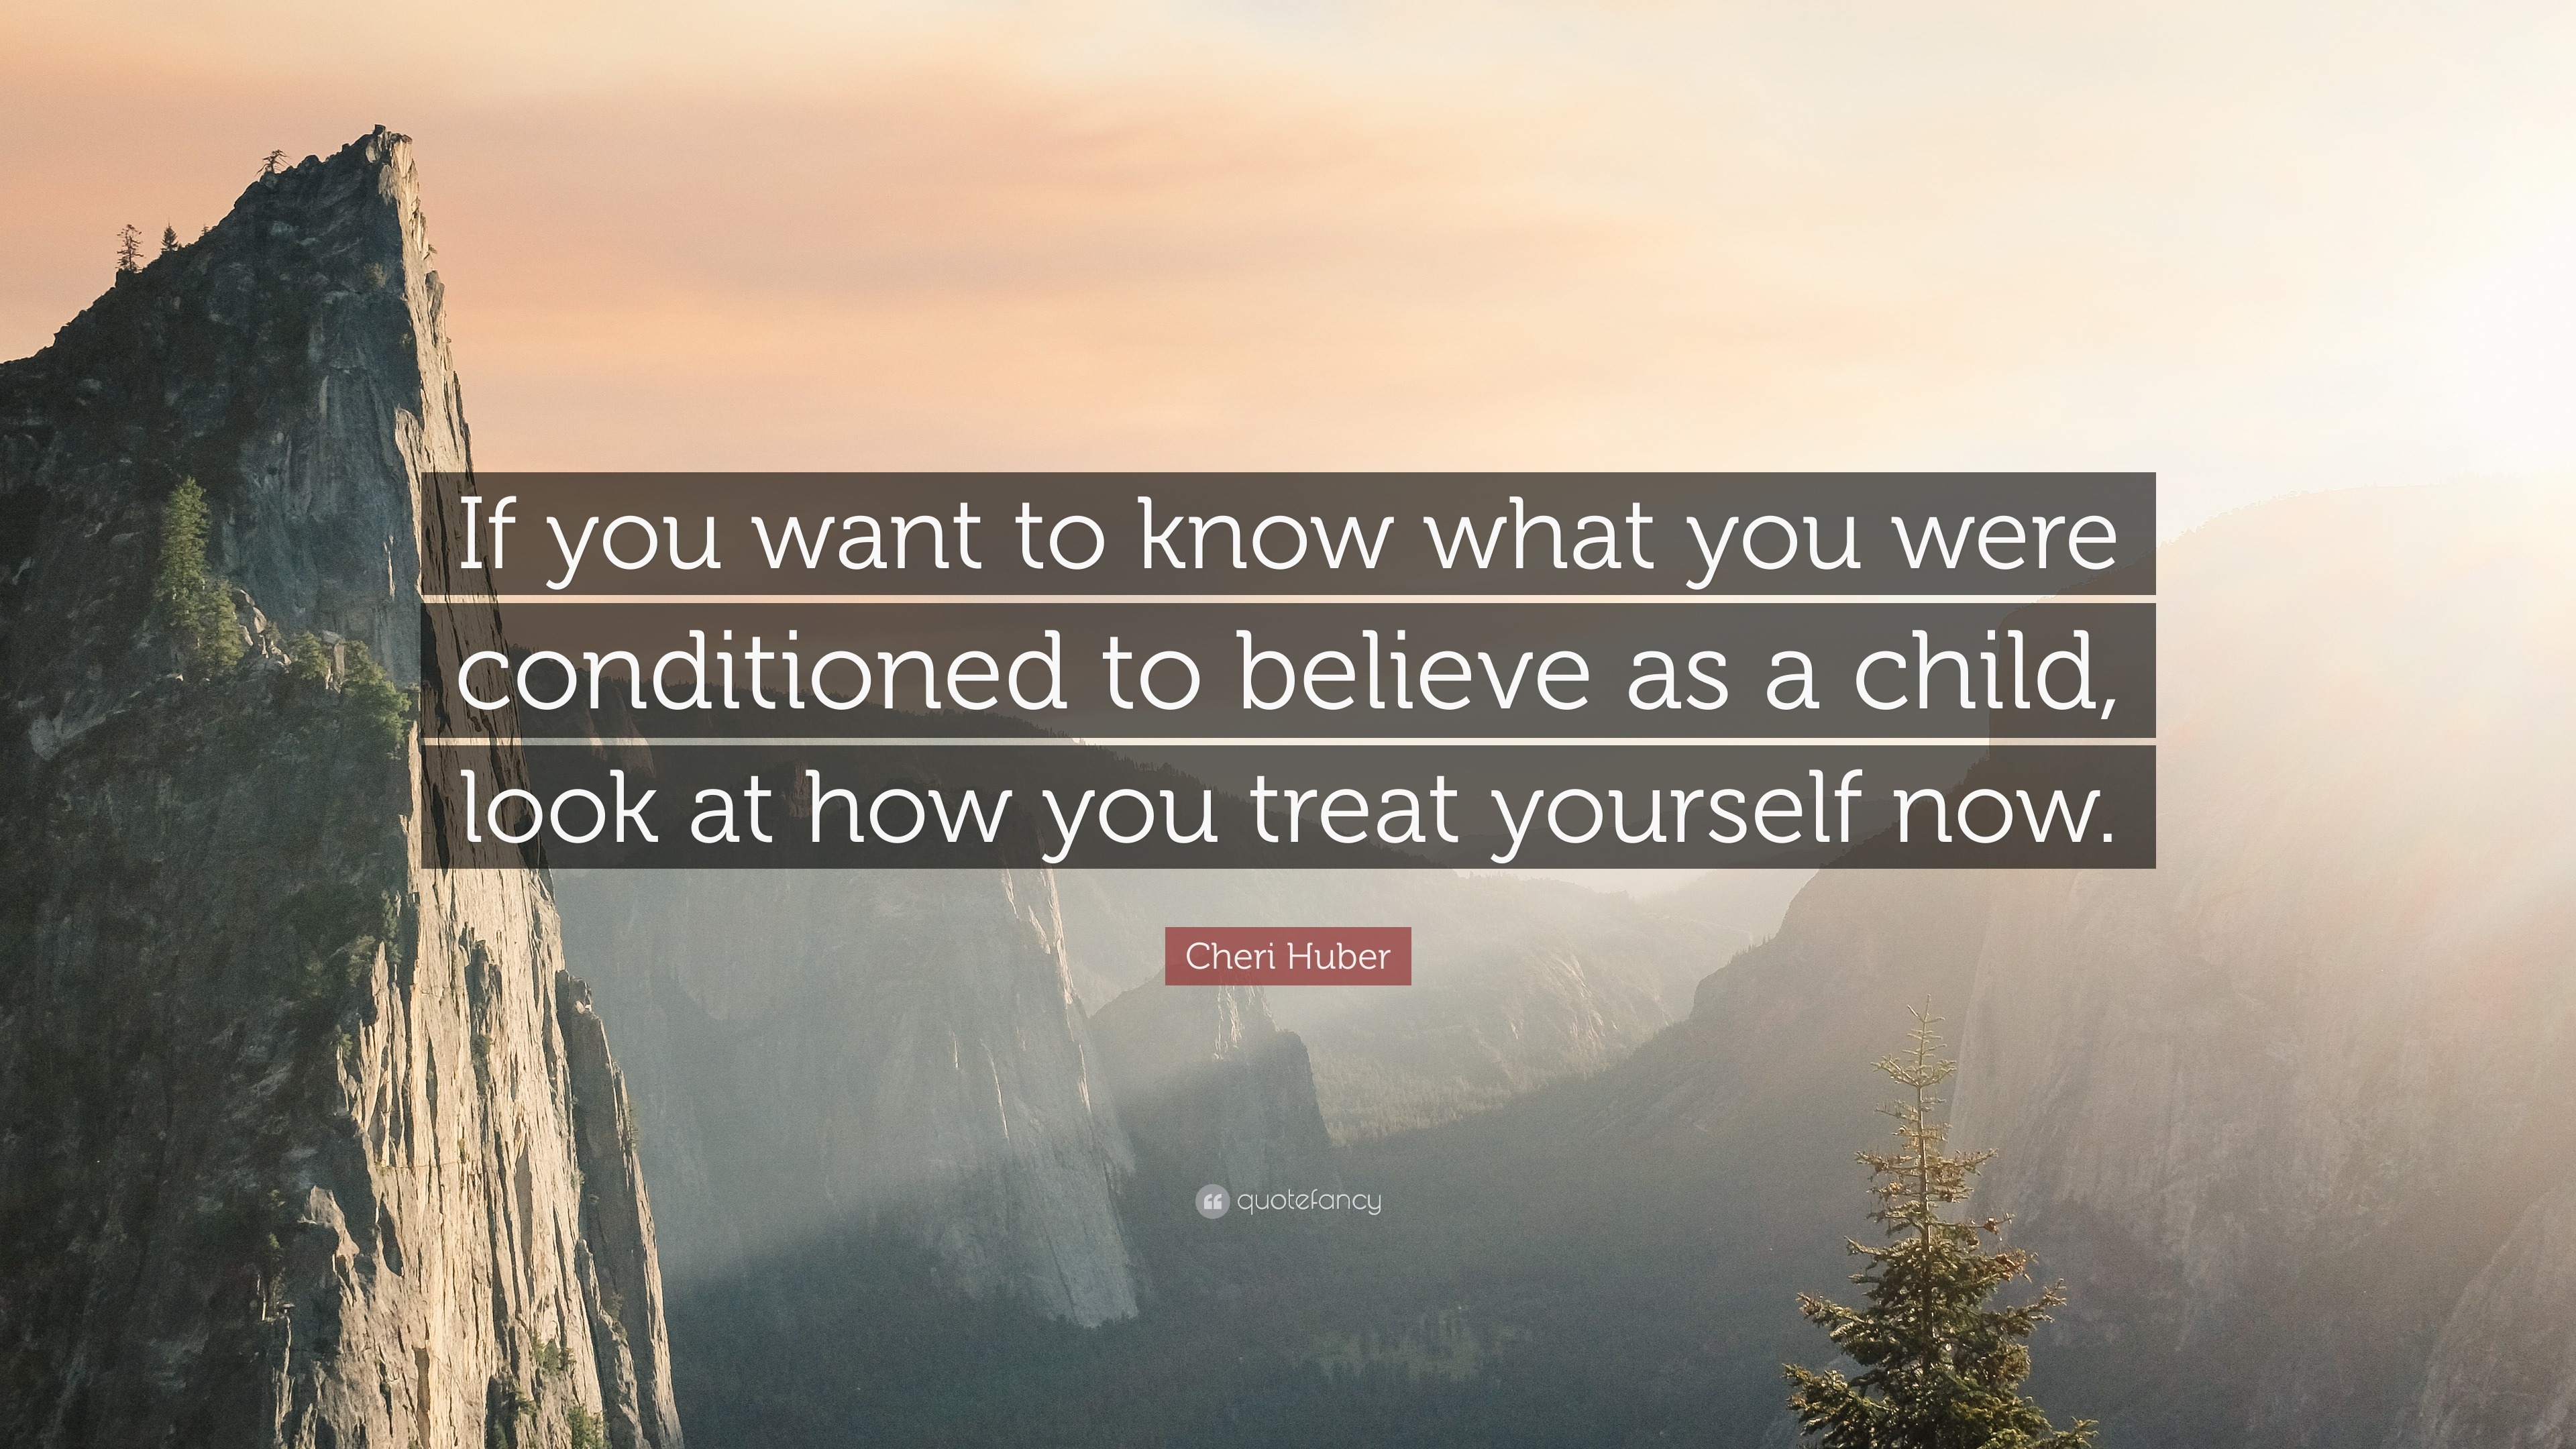 Cheri Huber Quote: “If you want to know what you were conditioned to ...